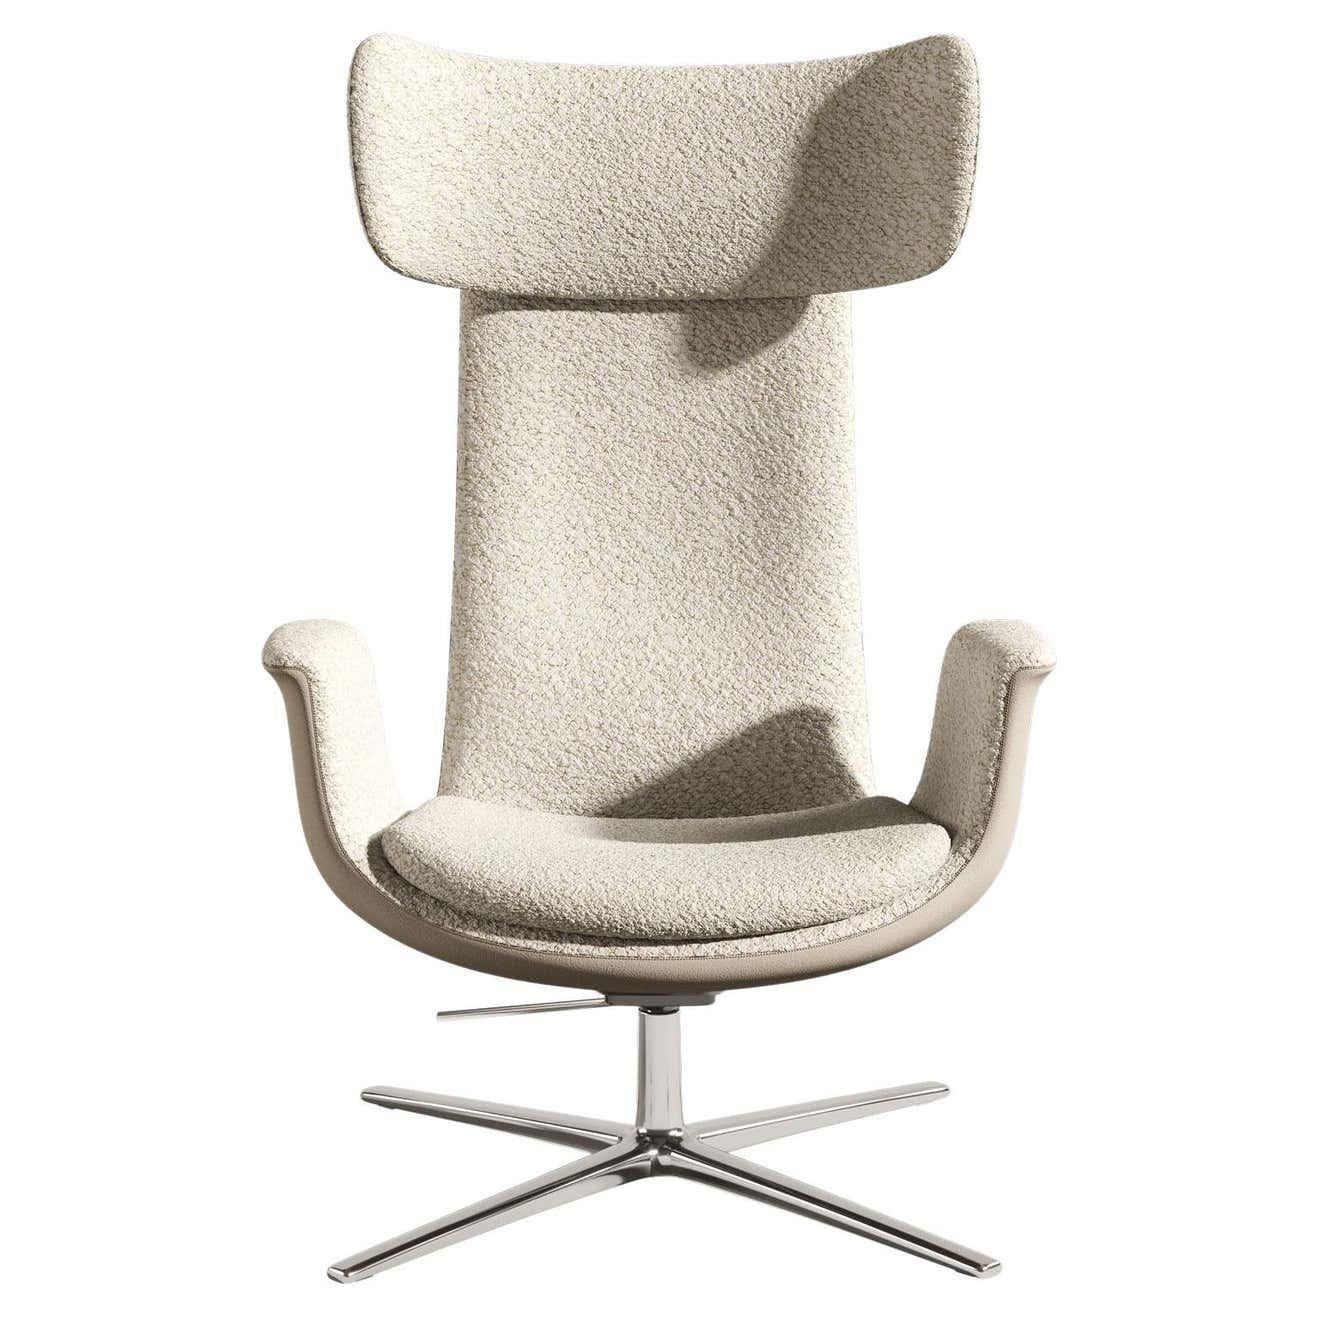 White Odyssey Armchair Adjustable Headrest Leather & Fabric Finish

Materials: 
Fabric, leather

Dimensions: 
D 81 cm x W 75 cm x H 111 cm.

Odyssey is an out-of-this world armchair designed by Eugeni Quitllet for BD. The meeting of